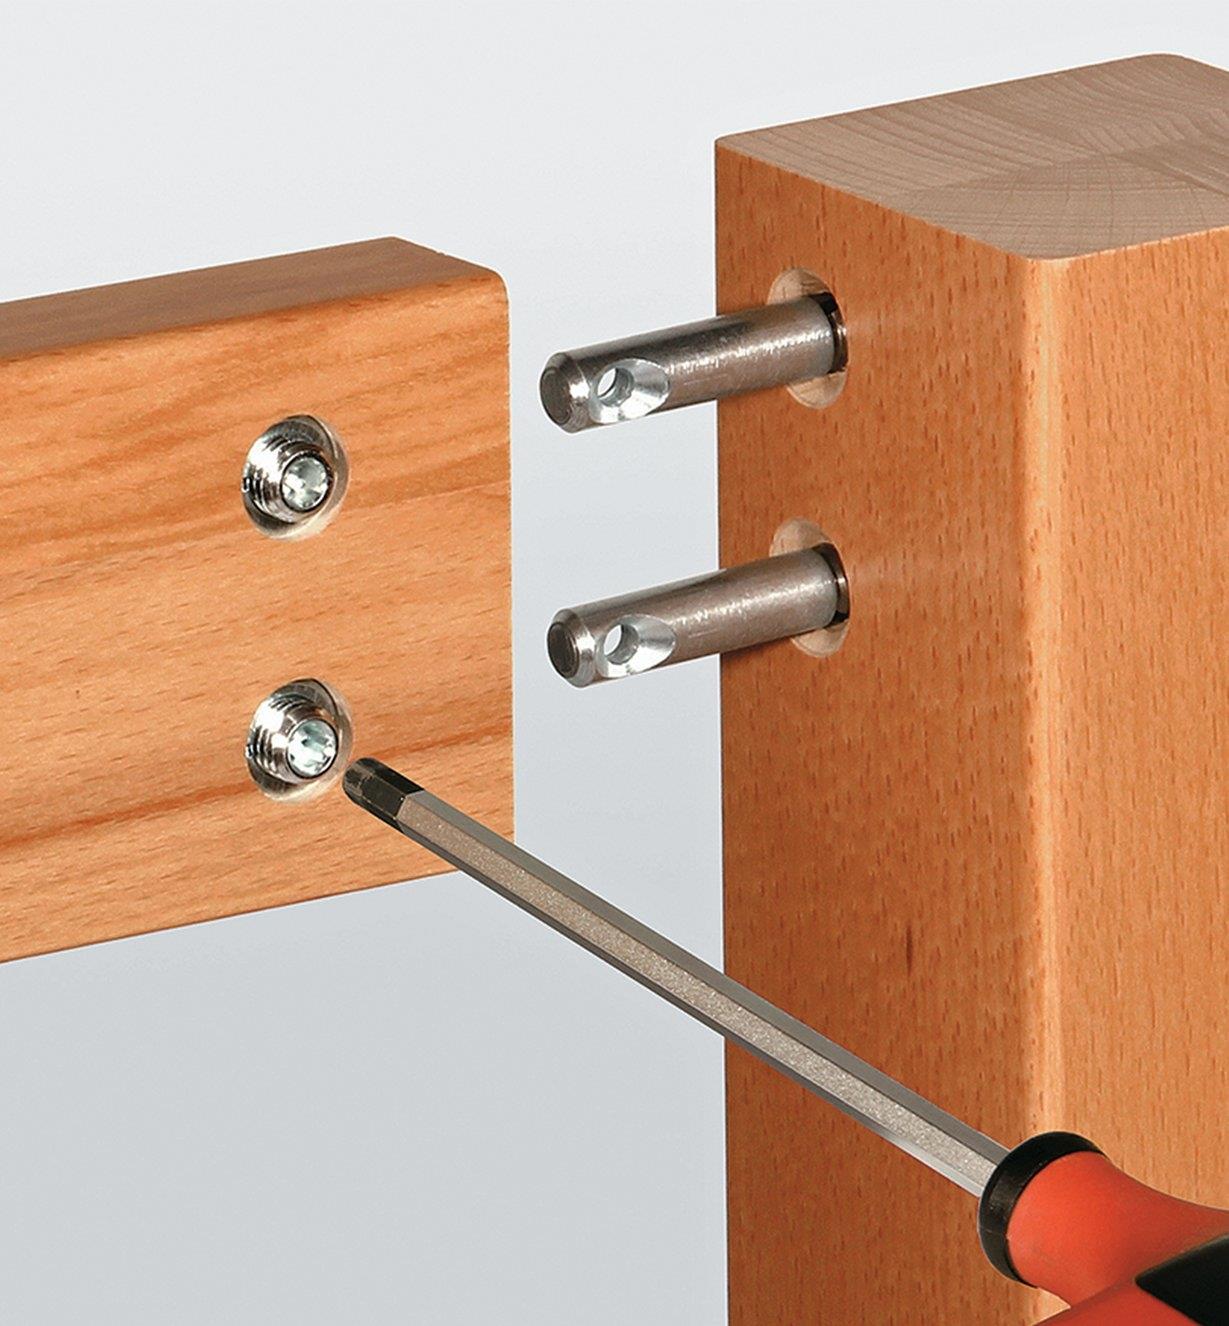 Installing cross dowels in one side of a joint